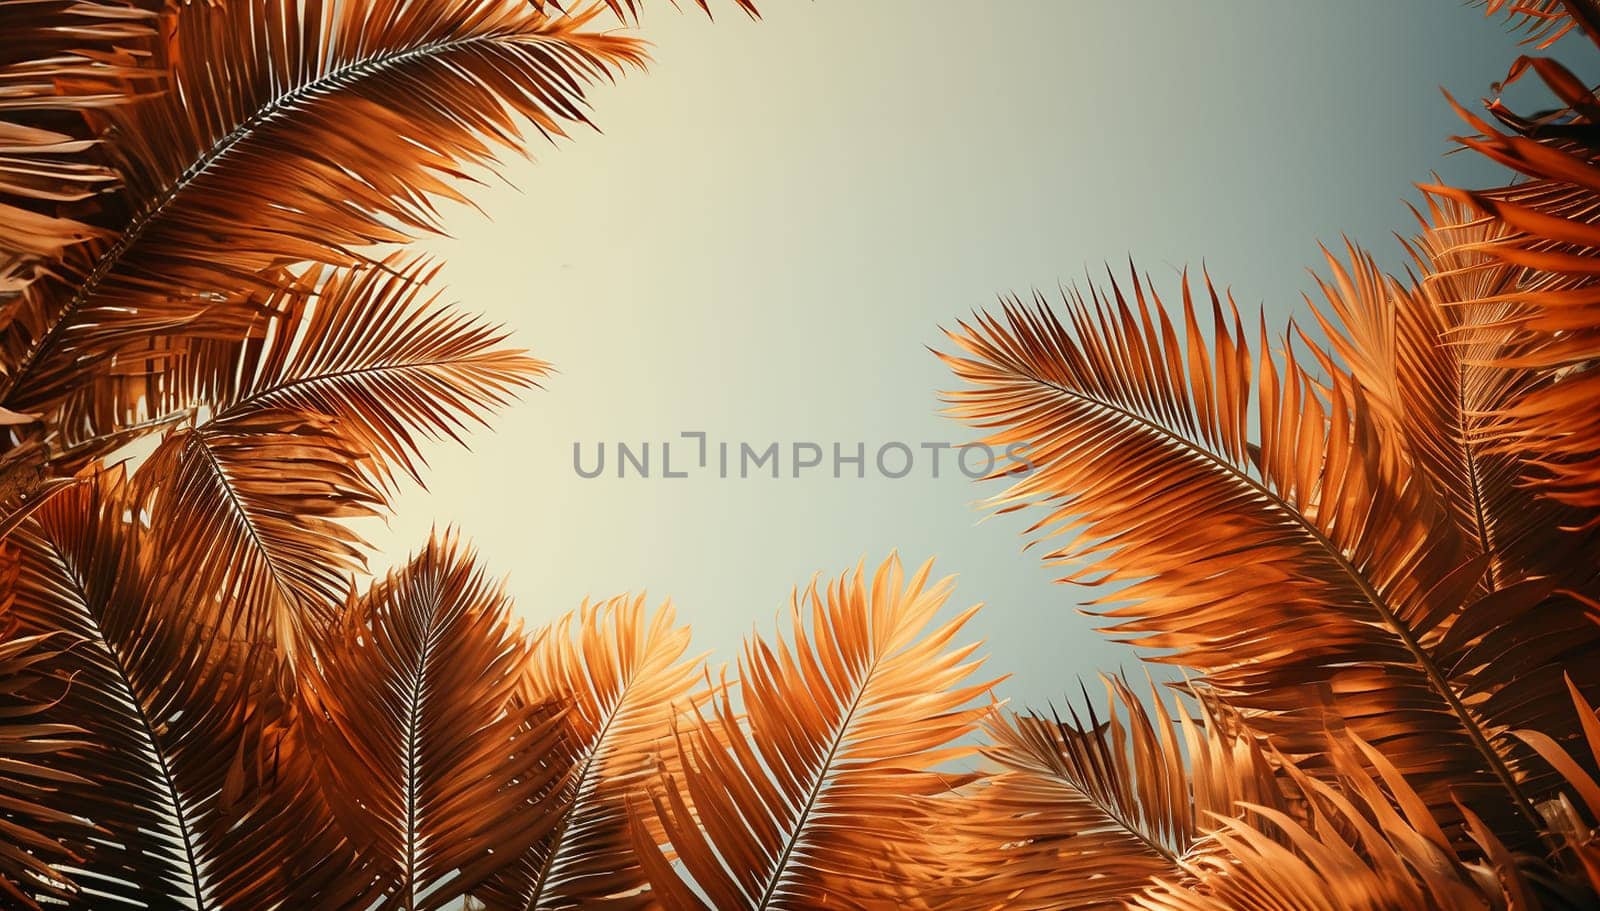 Palm leaves oin the sky with sepia tones.Palm tree with coconut, retro style photo. Summer travel destination. Fluffy palm leaf on sunset sky. Romantic honeymoon or holiday banner template. Coco palm crown view from ground. Tropical nature copy space by Annebel146